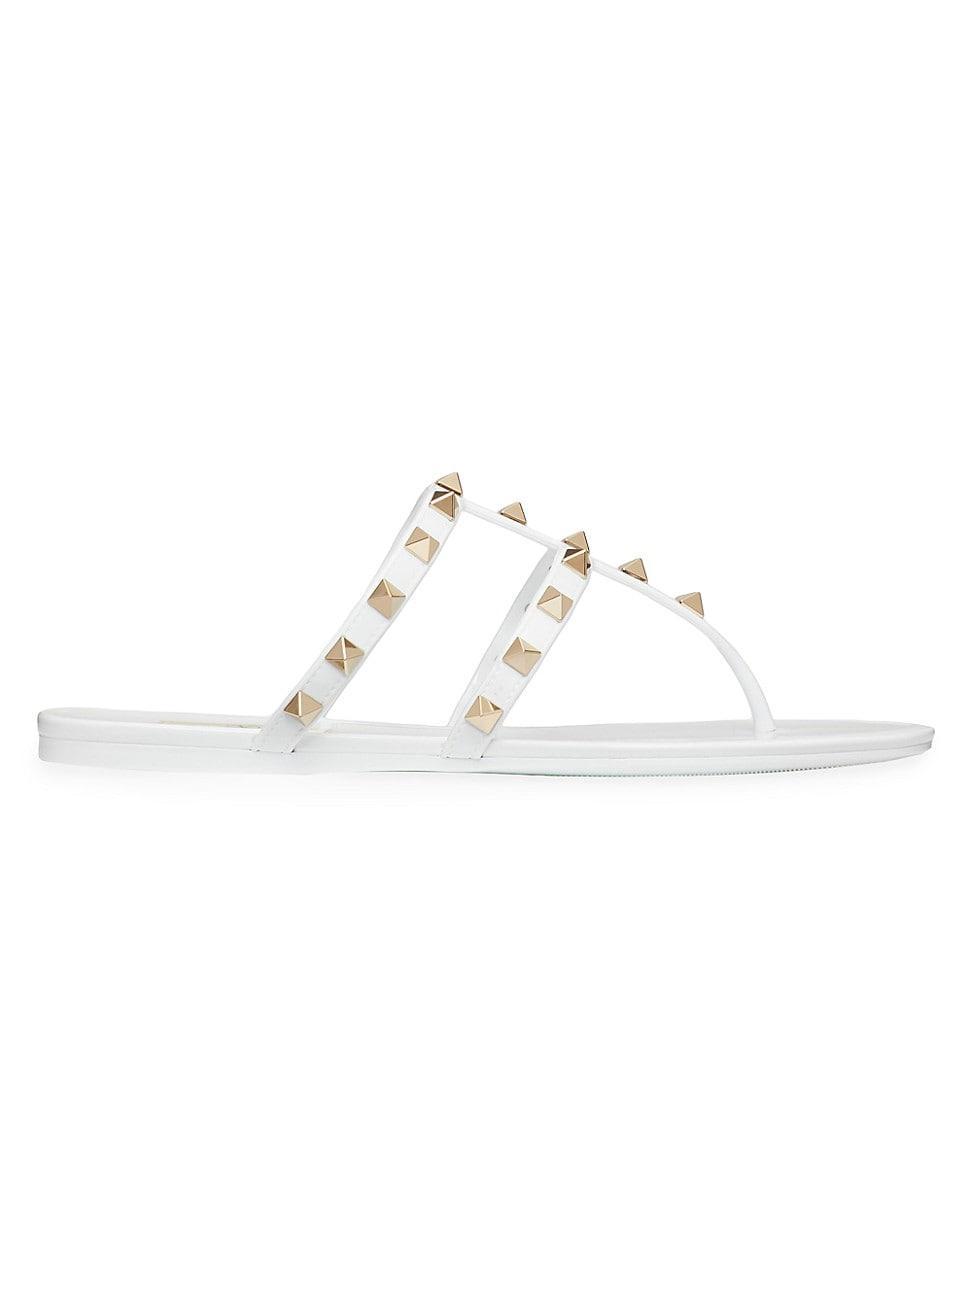 Womens Rockstud Flat Rubber Sandals Product Image